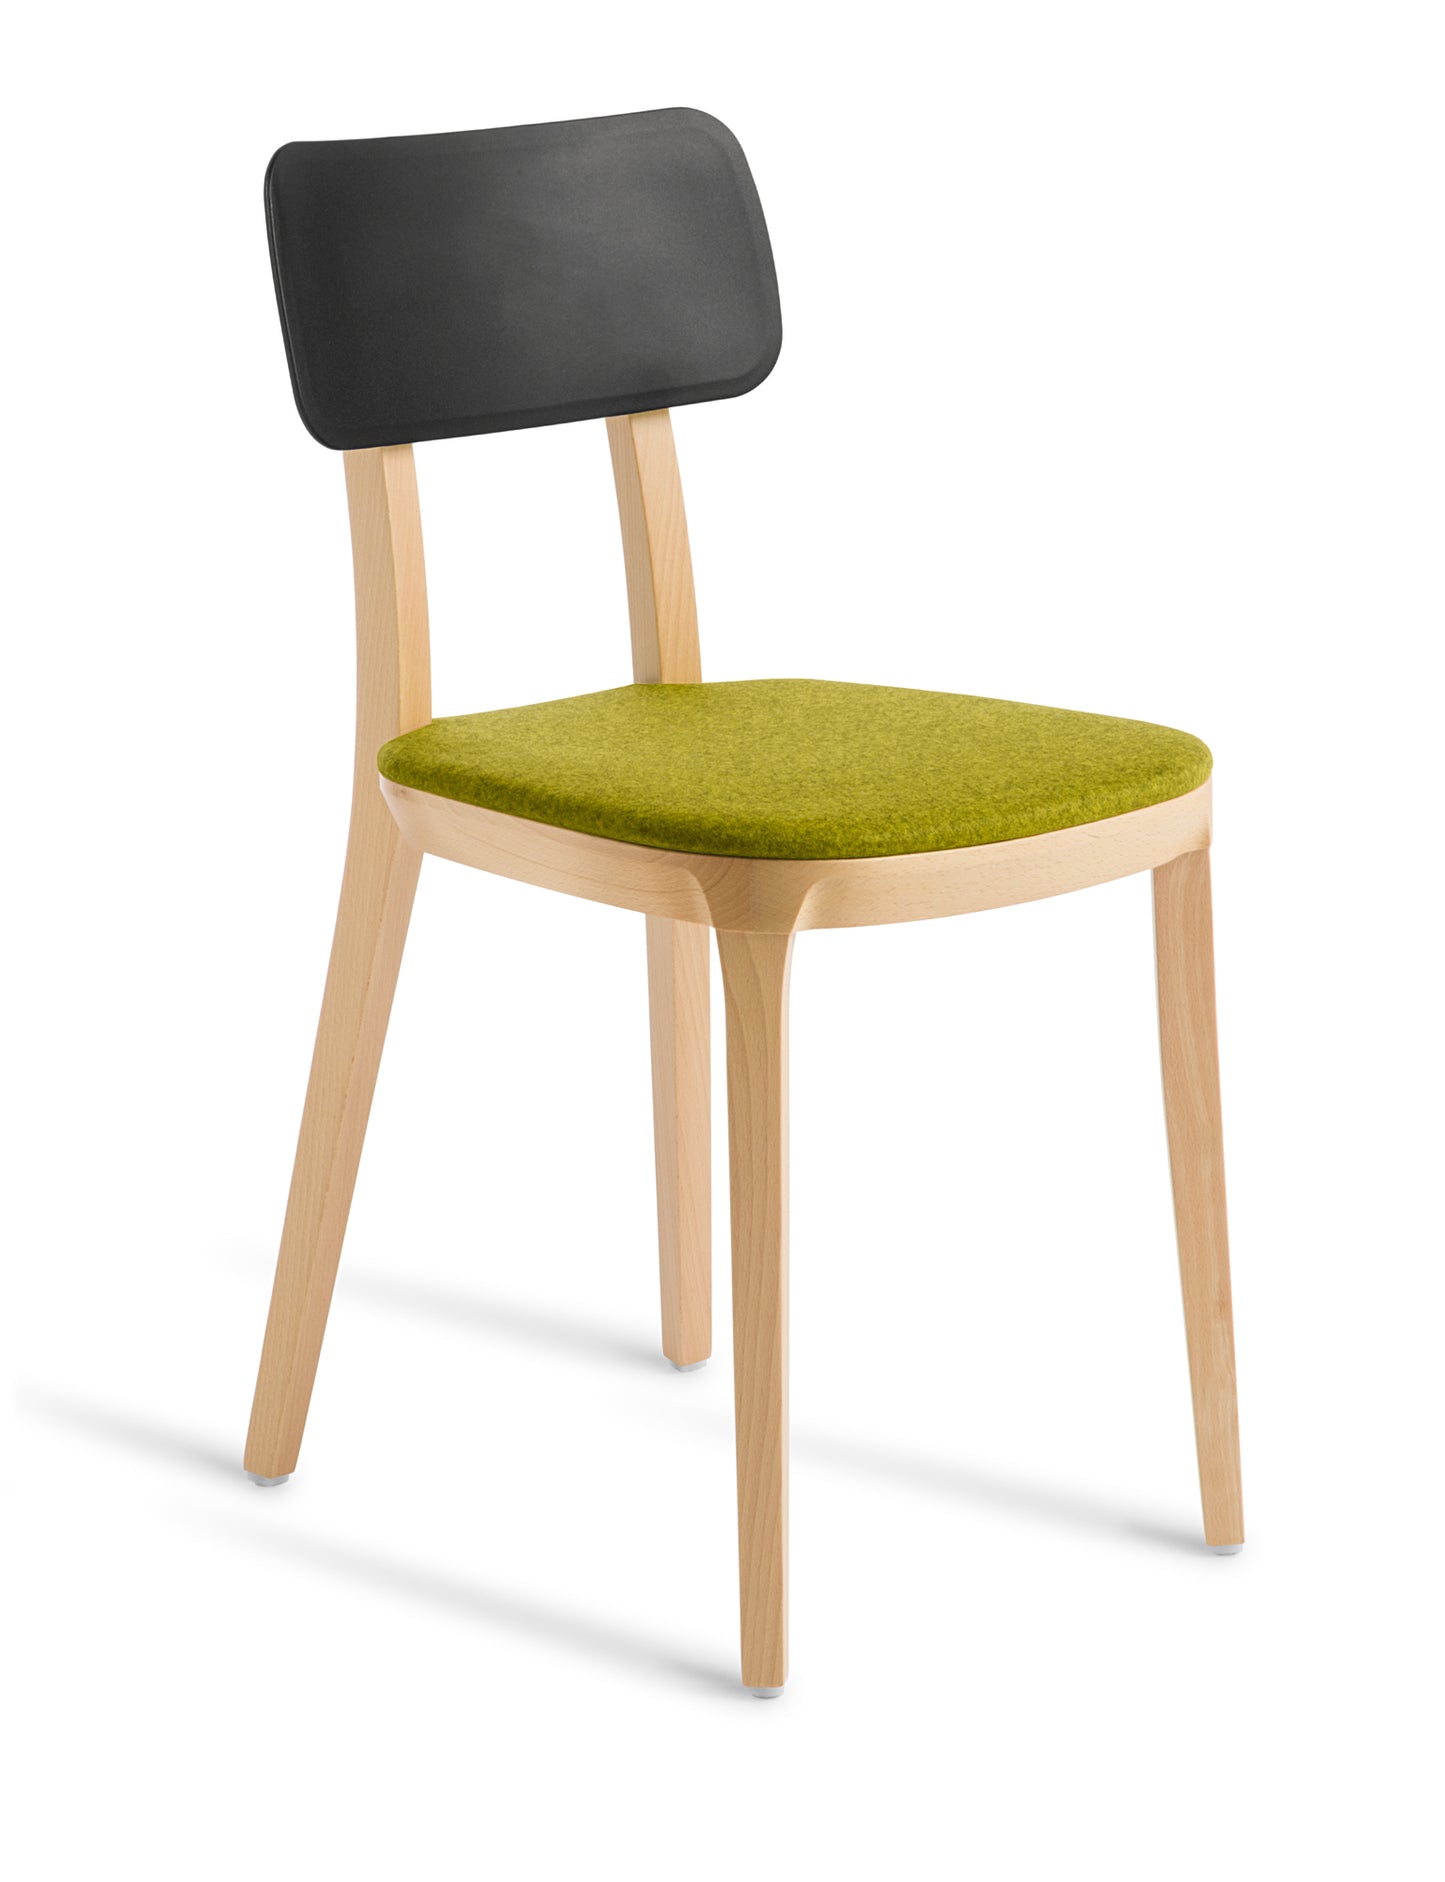 Polka Chair - Seat Upholstered